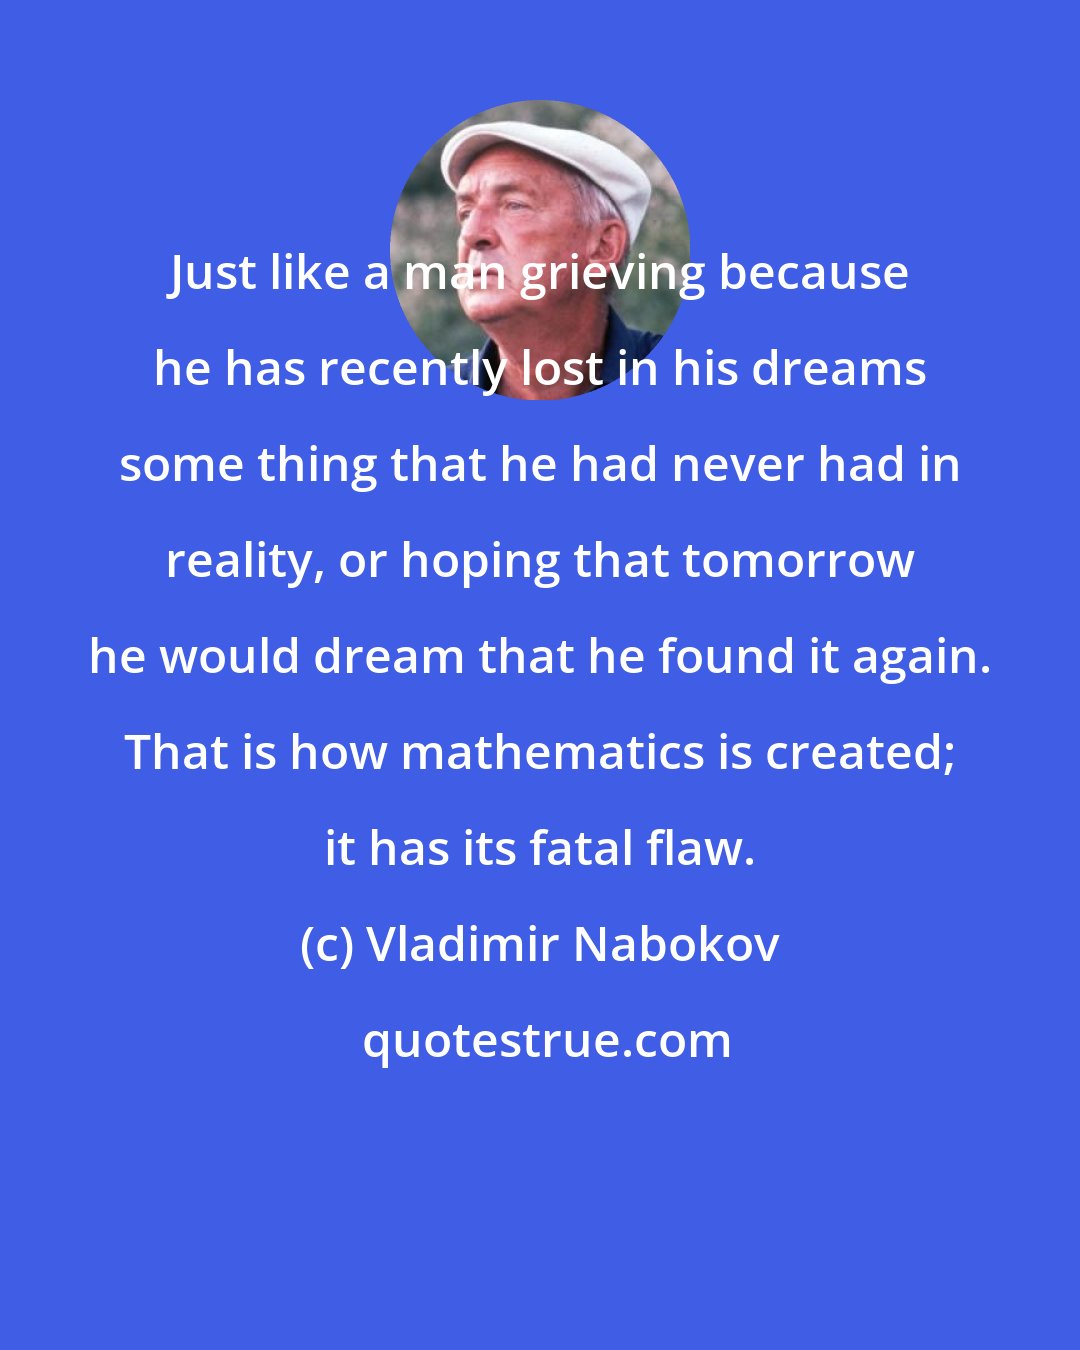 Vladimir Nabokov: Just like a man grieving because he has recently lost in his dreams some thing that he had never had in reality, or hoping that tomorrow he would dream that he found it again. That is how mathematics is created; it has its fatal flaw.